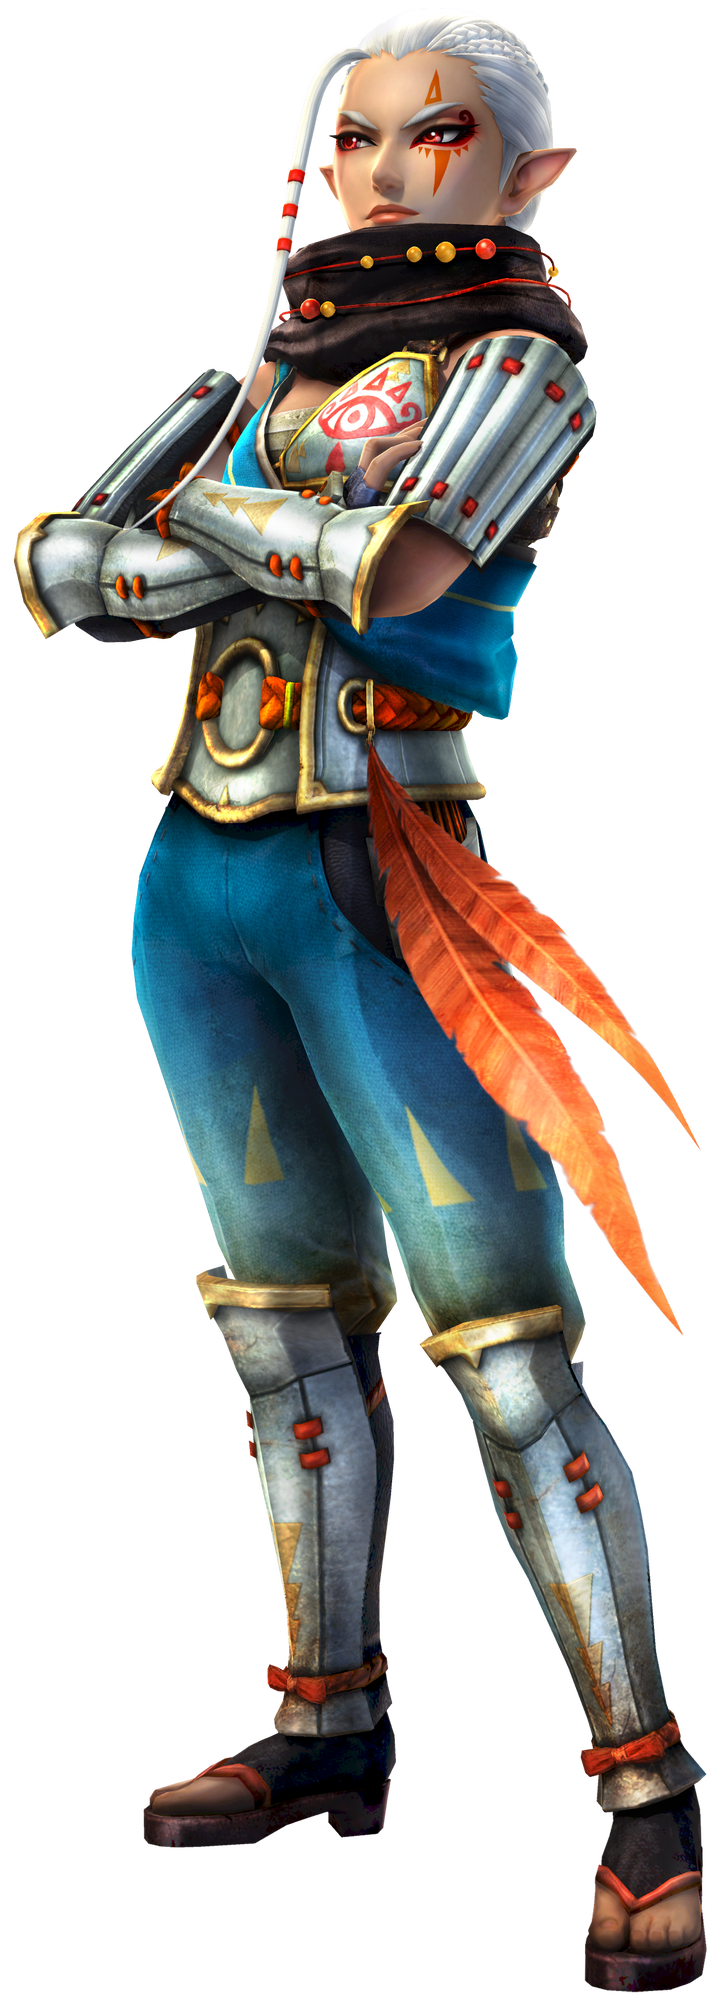 Impa_Hyrule_Warriors.png